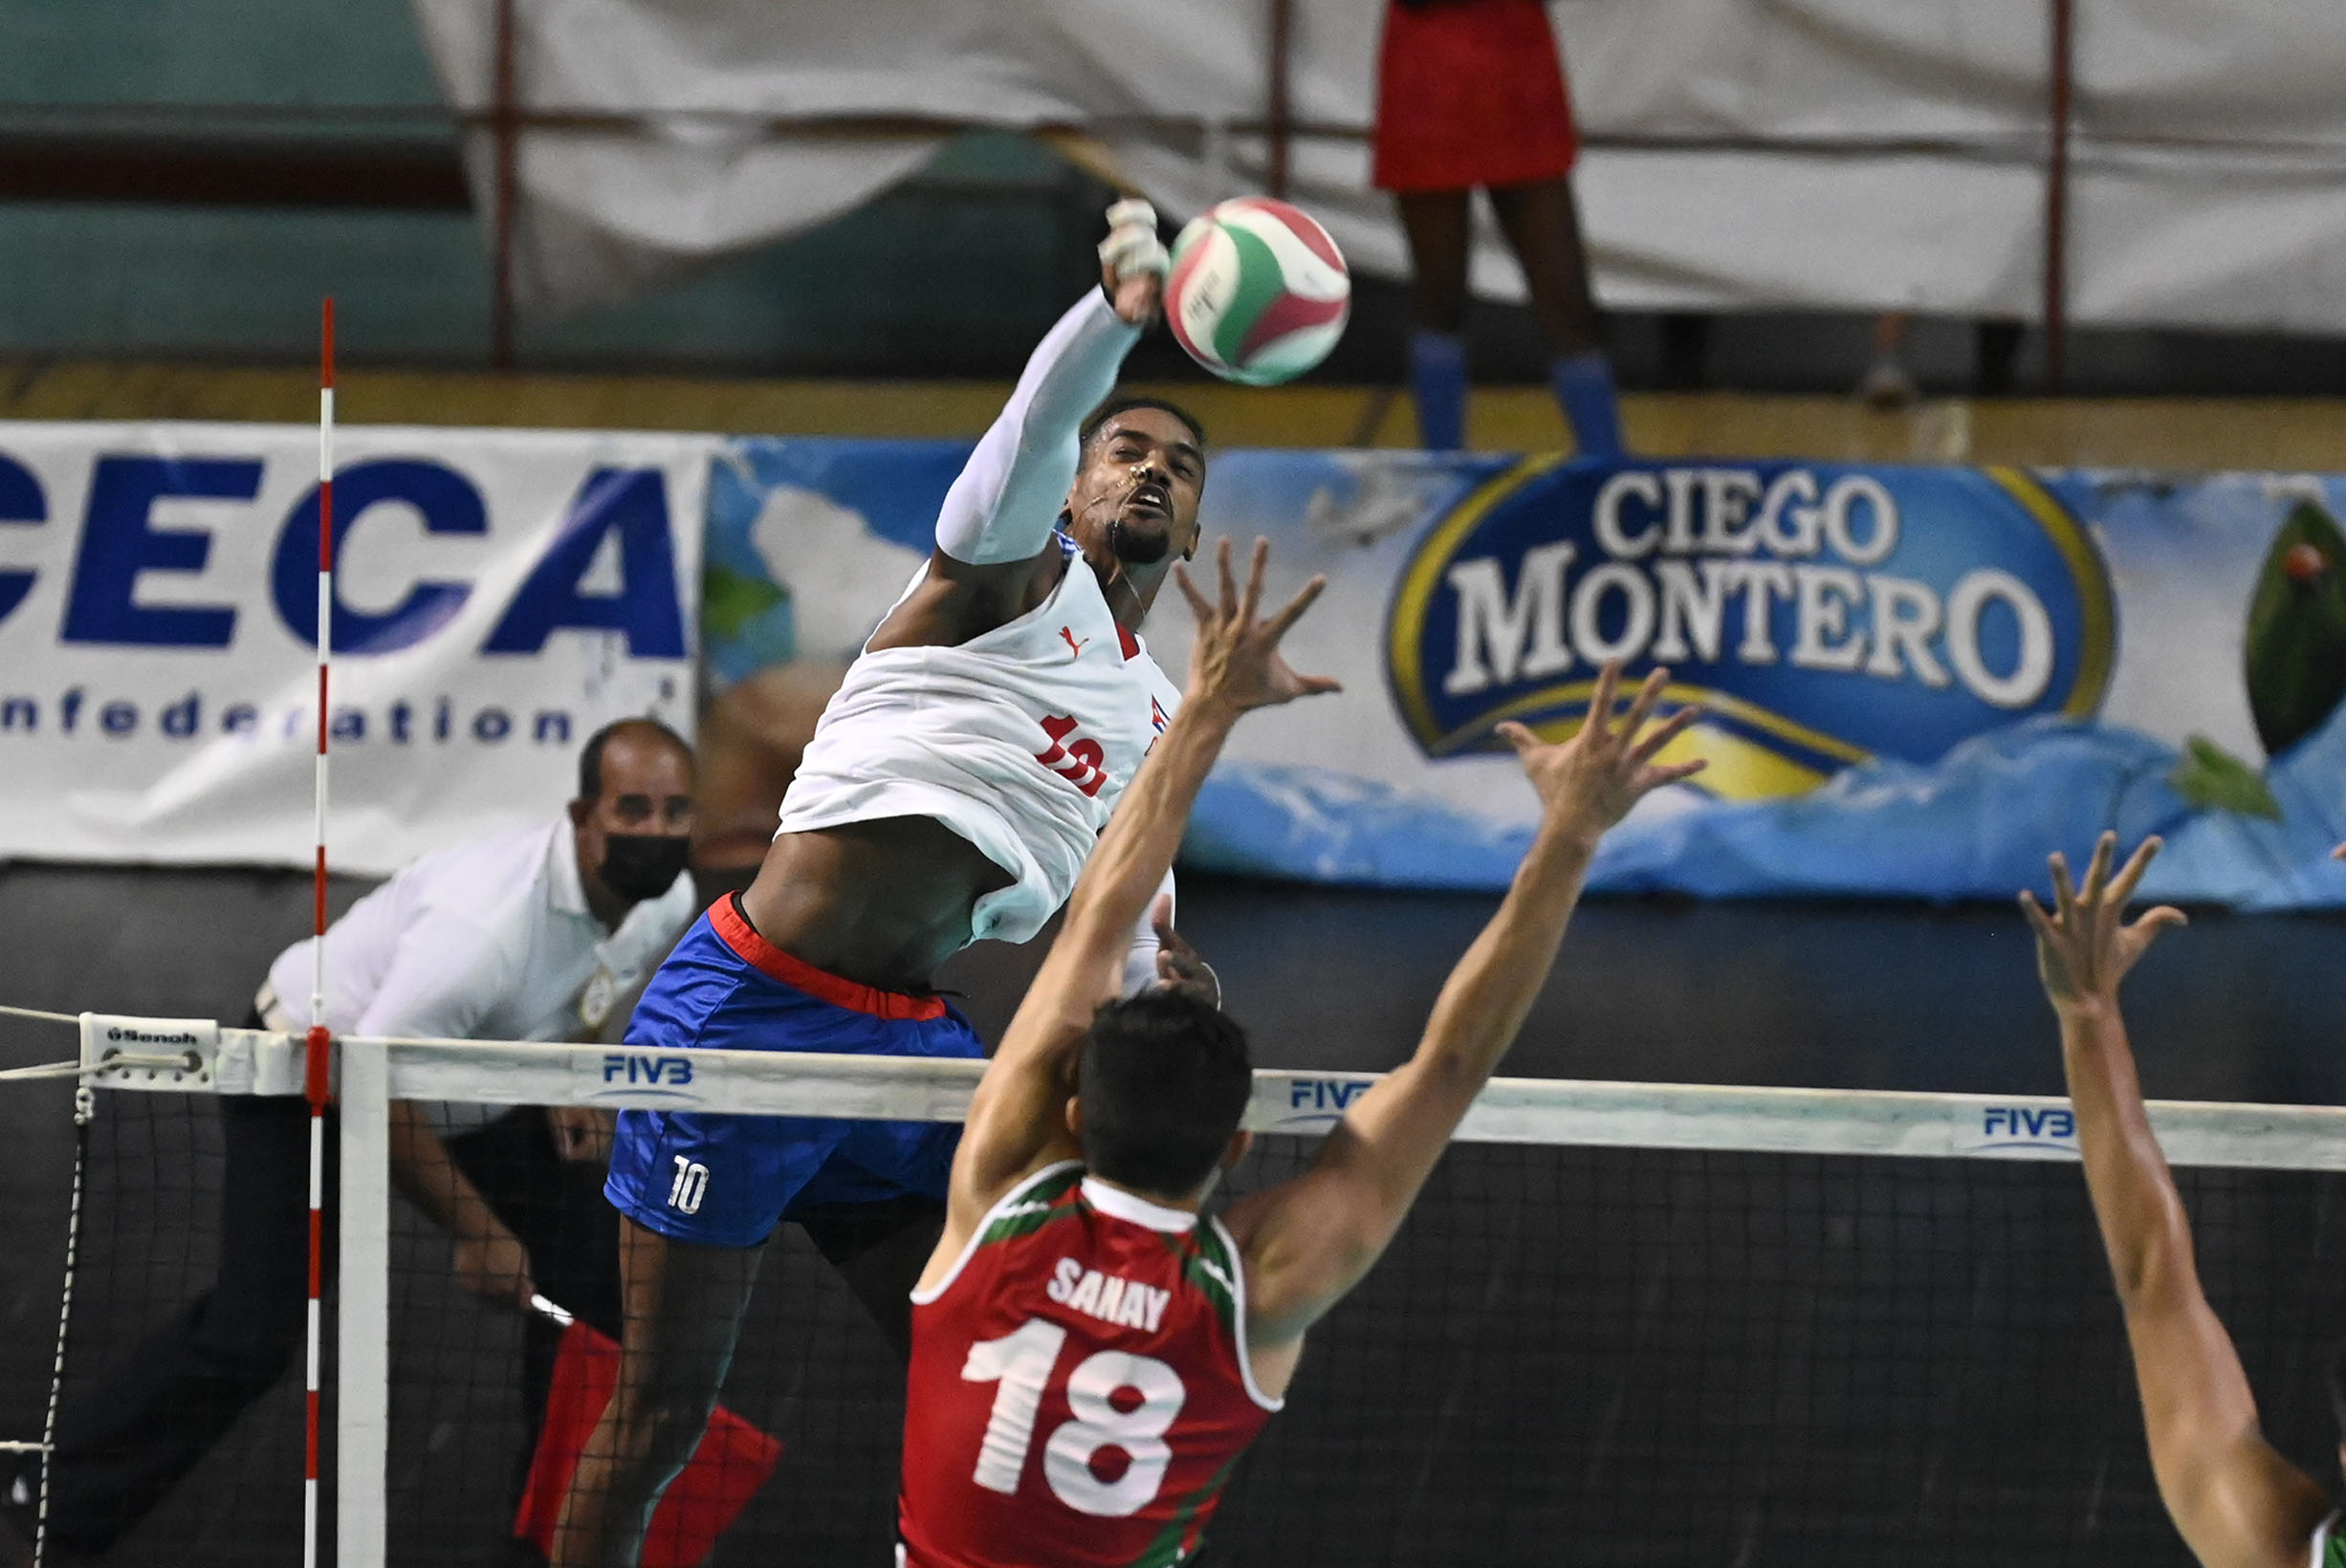 Cuba defeated Mexico to secure first place and ticket to the 2023 World Final